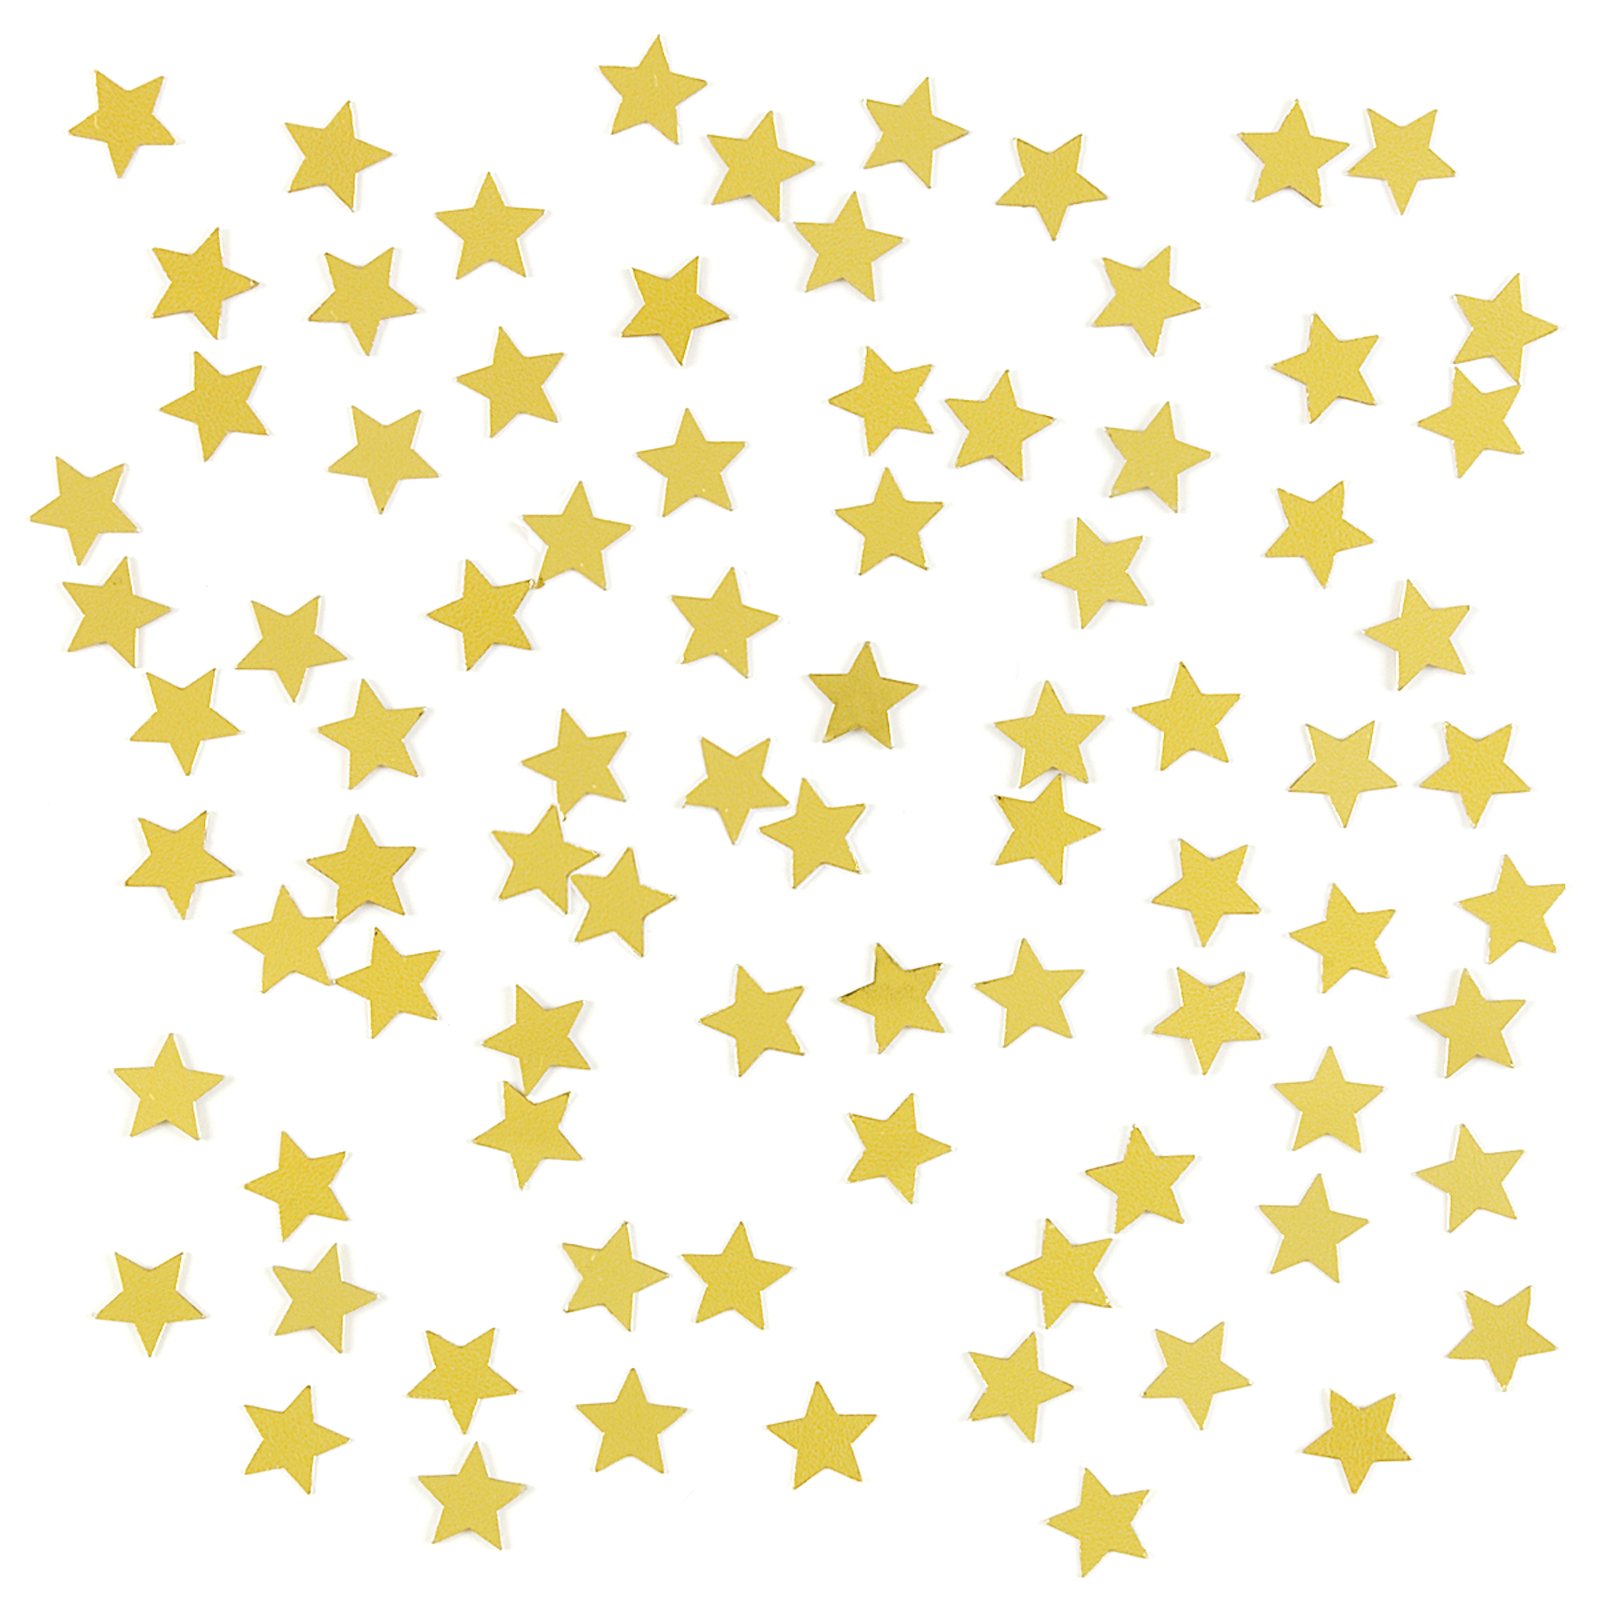 Gold star public domain stars gold curved star dividers stars clip 